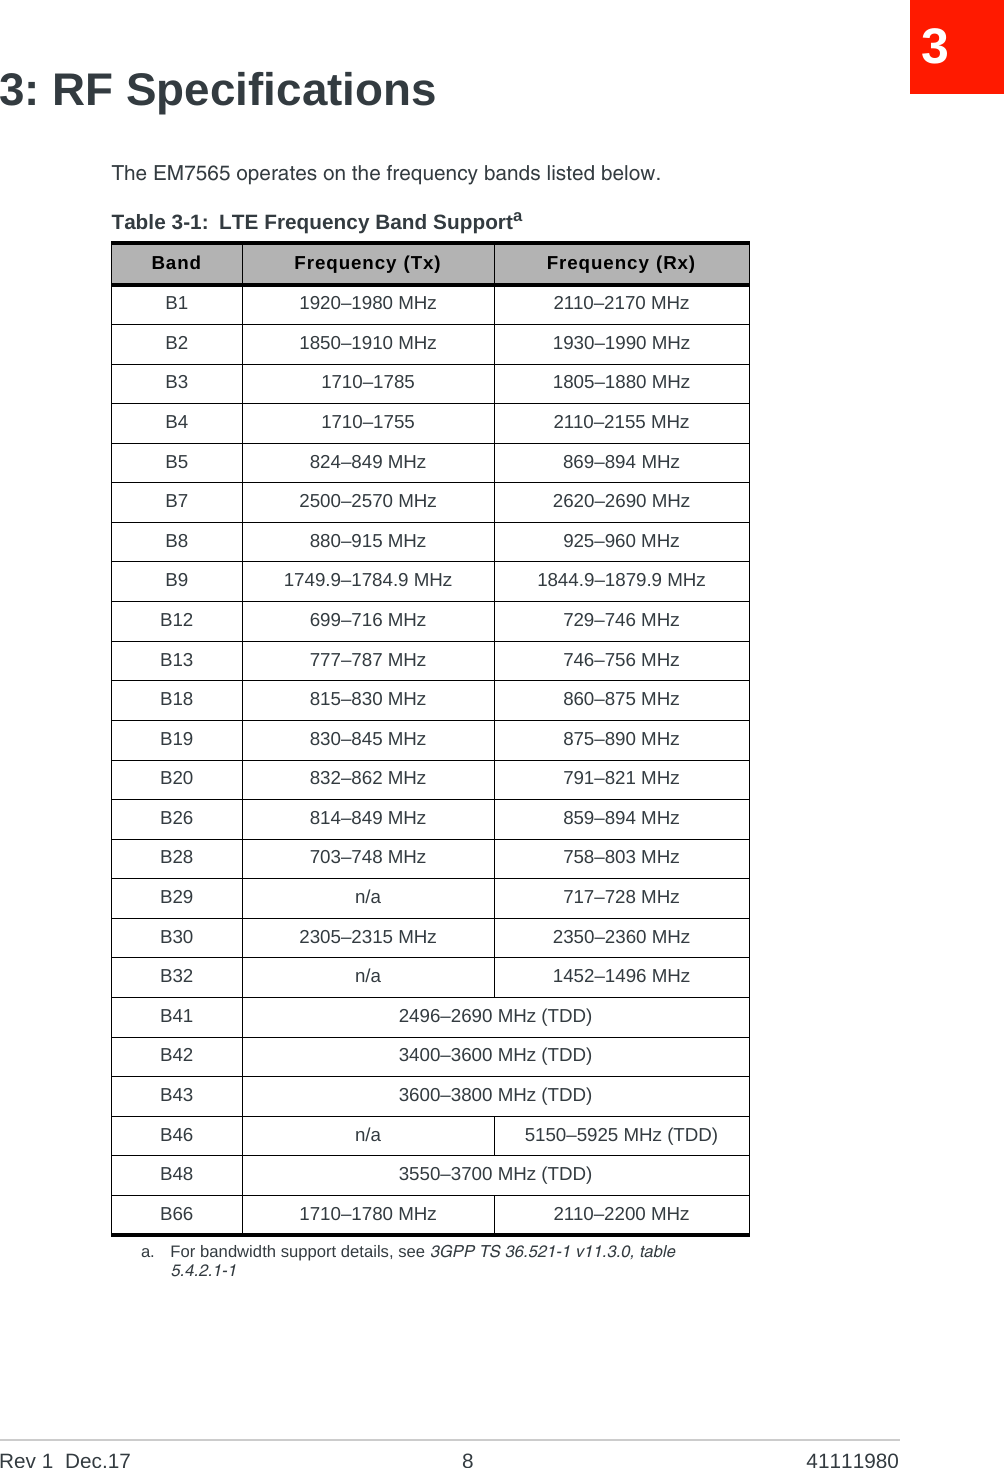 Rev 1  Dec.17 8 4111198033: RF SpecificationsThe EM7565 operates on the frequency bands listed below.Table 3-1: LTE Frequency Band Supportaa. For bandwidth support details, see 3GPP TS 36.521-1 v11.3.0, table 5.4.2.1-1Band Frequency (Tx) Frequency (Rx)B1 1920–1980 MHz 2110–2170 MHzB2 1850–1910 MHz 1930–1990 MHzB3 1710–1785 1805–1880 MHzB4 1710–1755 2110–2155 MHzB5 824–849 MHz 869–894 MHzB7 2500–2570 MHz 2620–2690 MHzB8 880–915 MHz 925–960 MHzB9 1749.9–1784.9 MHz 1844.9–1879.9 MHzB12 699–716 MHz 729–746 MHzB13 777–787 MHz 746–756 MHzB18 815–830 MHz 860–875 MHzB19 830–845 MHz 875–890 MHzB20 832–862 MHz 791–821 MHzB26 814–849 MHz 859–894 MHzB28 703–748 MHz 758–803 MHzB29 n/a 717–728 MHzB30 2305–2315 MHz 2350–2360 MHzB32 n/a 1452–1496 MHzB41 2496–2690 MHz (TDD)B42 3400–3600 MHz (TDD)B43 3600–3800 MHz (TDD)B46 n/a 5150–5925 MHz (TDD)B48 3550–3700 MHz (TDD)B66 1710–1780 MHz 2110–2200 MHz